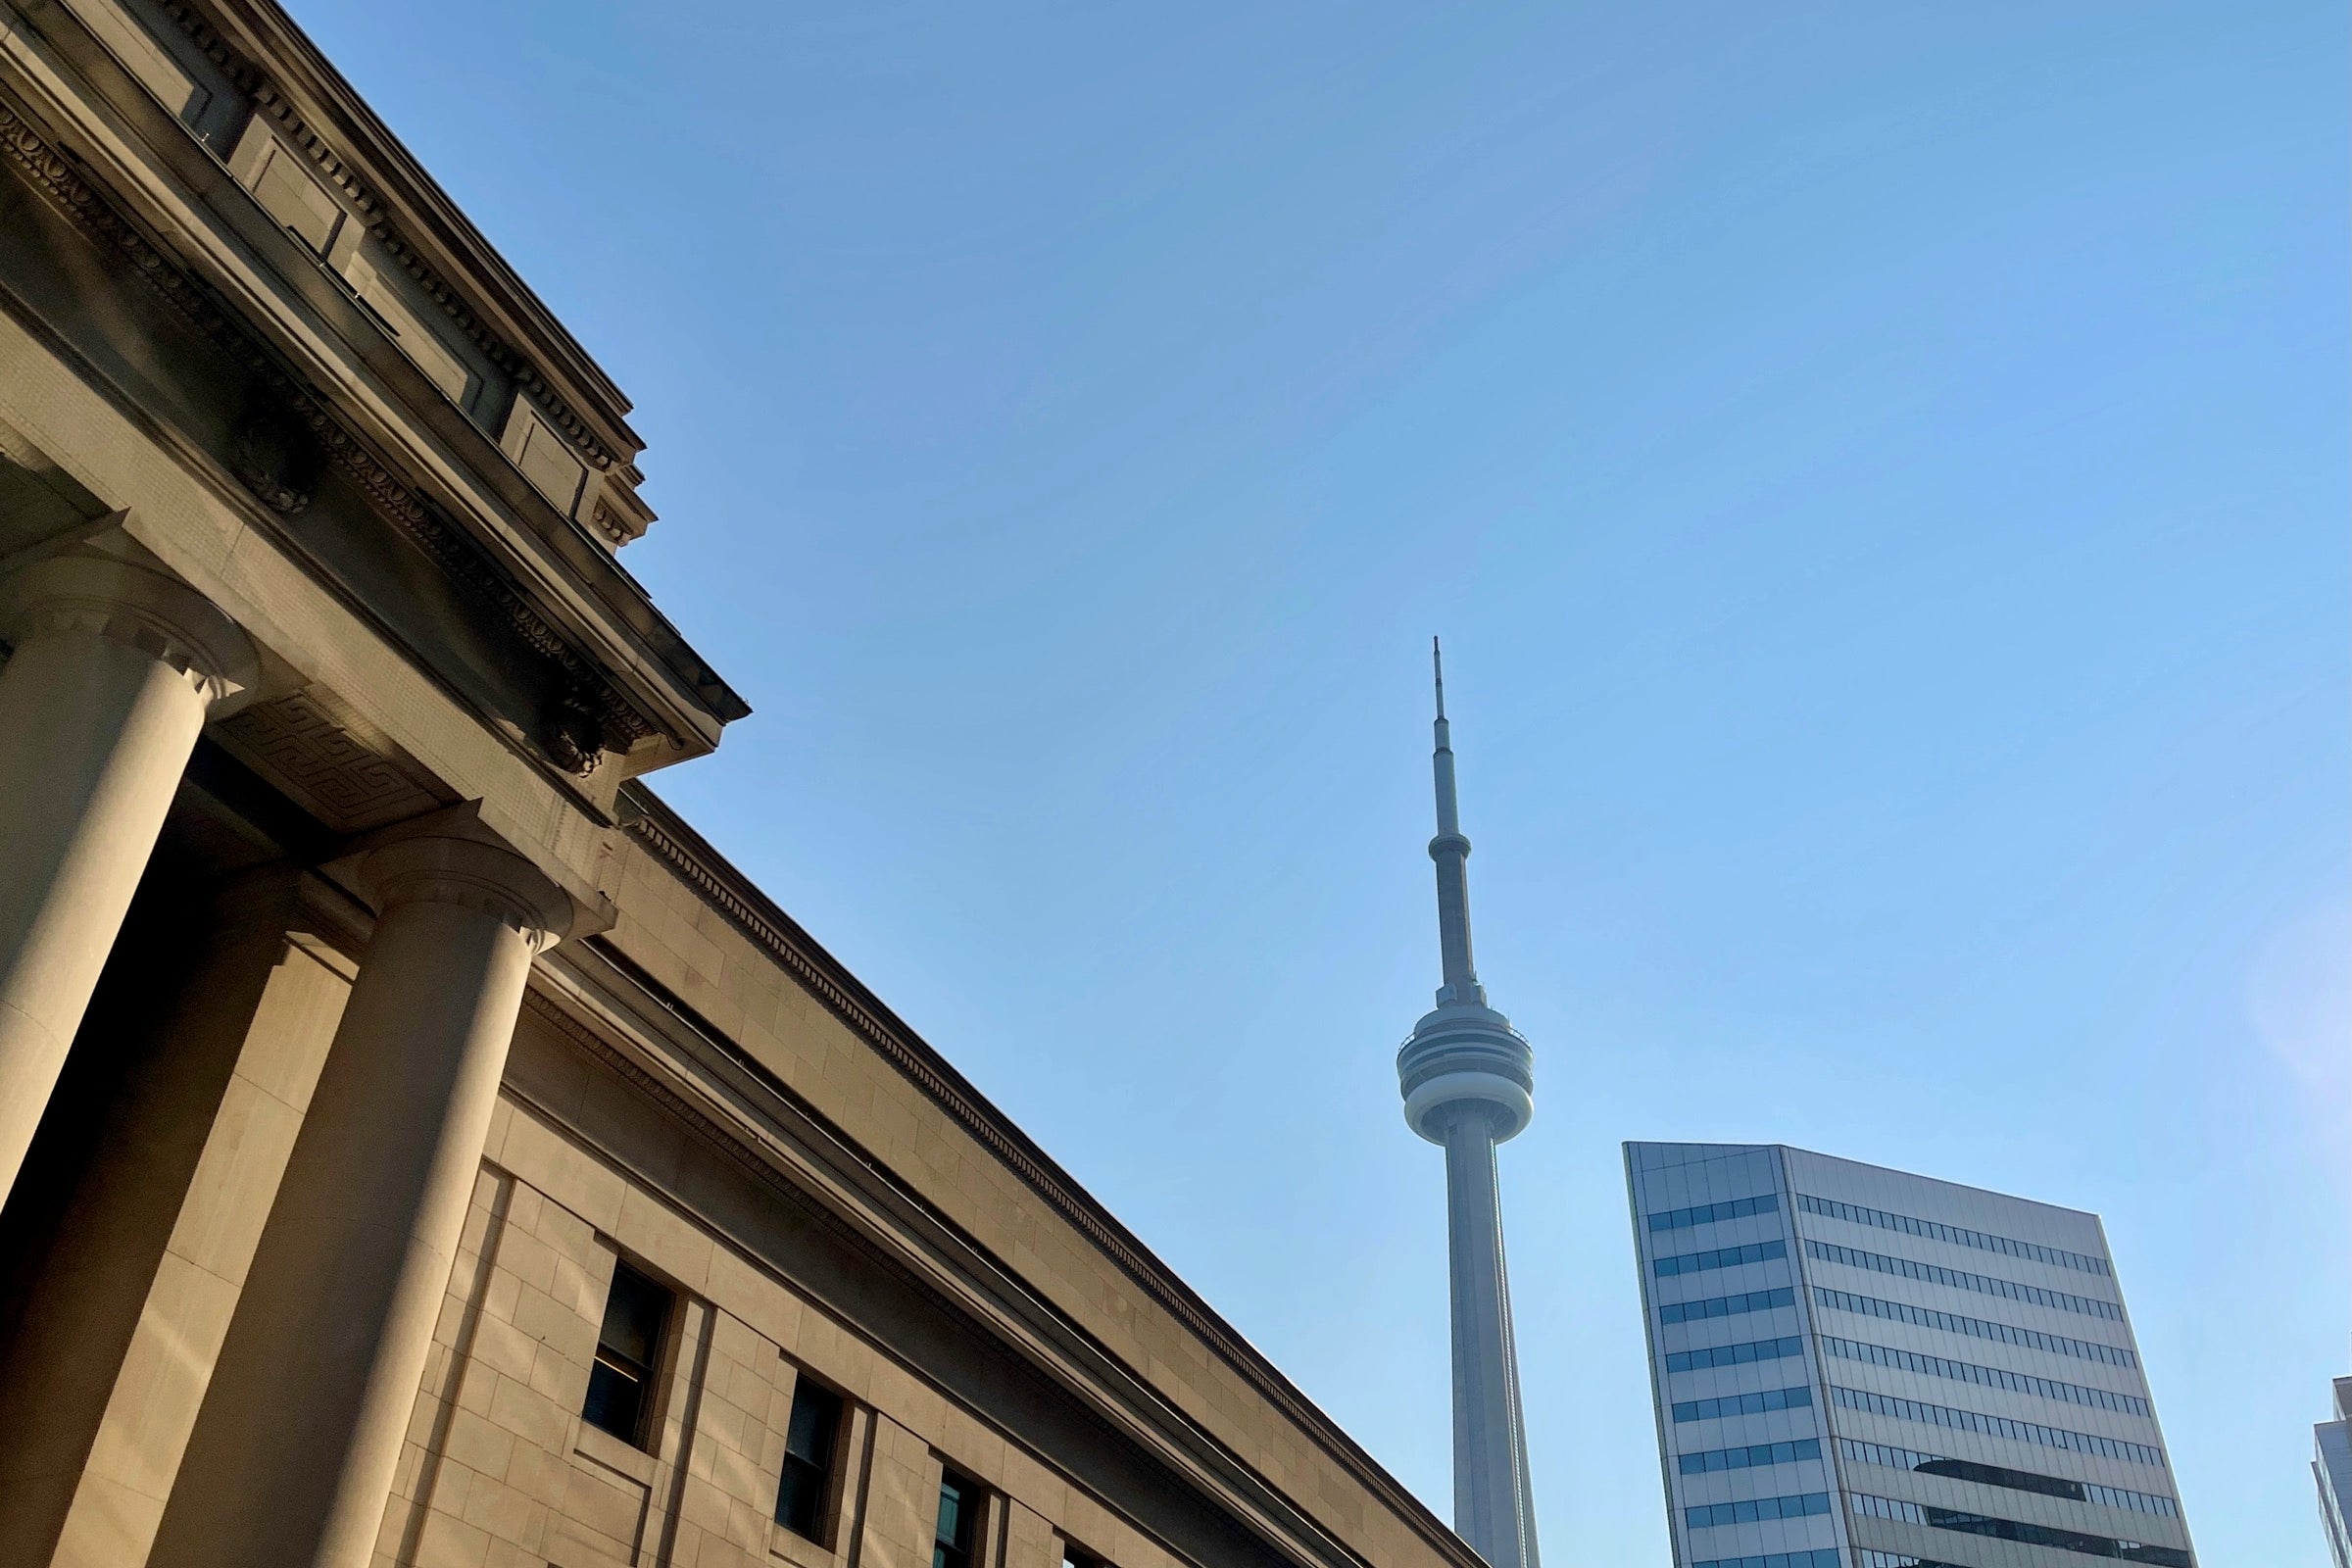 Toronto's Union Station and CN Tower